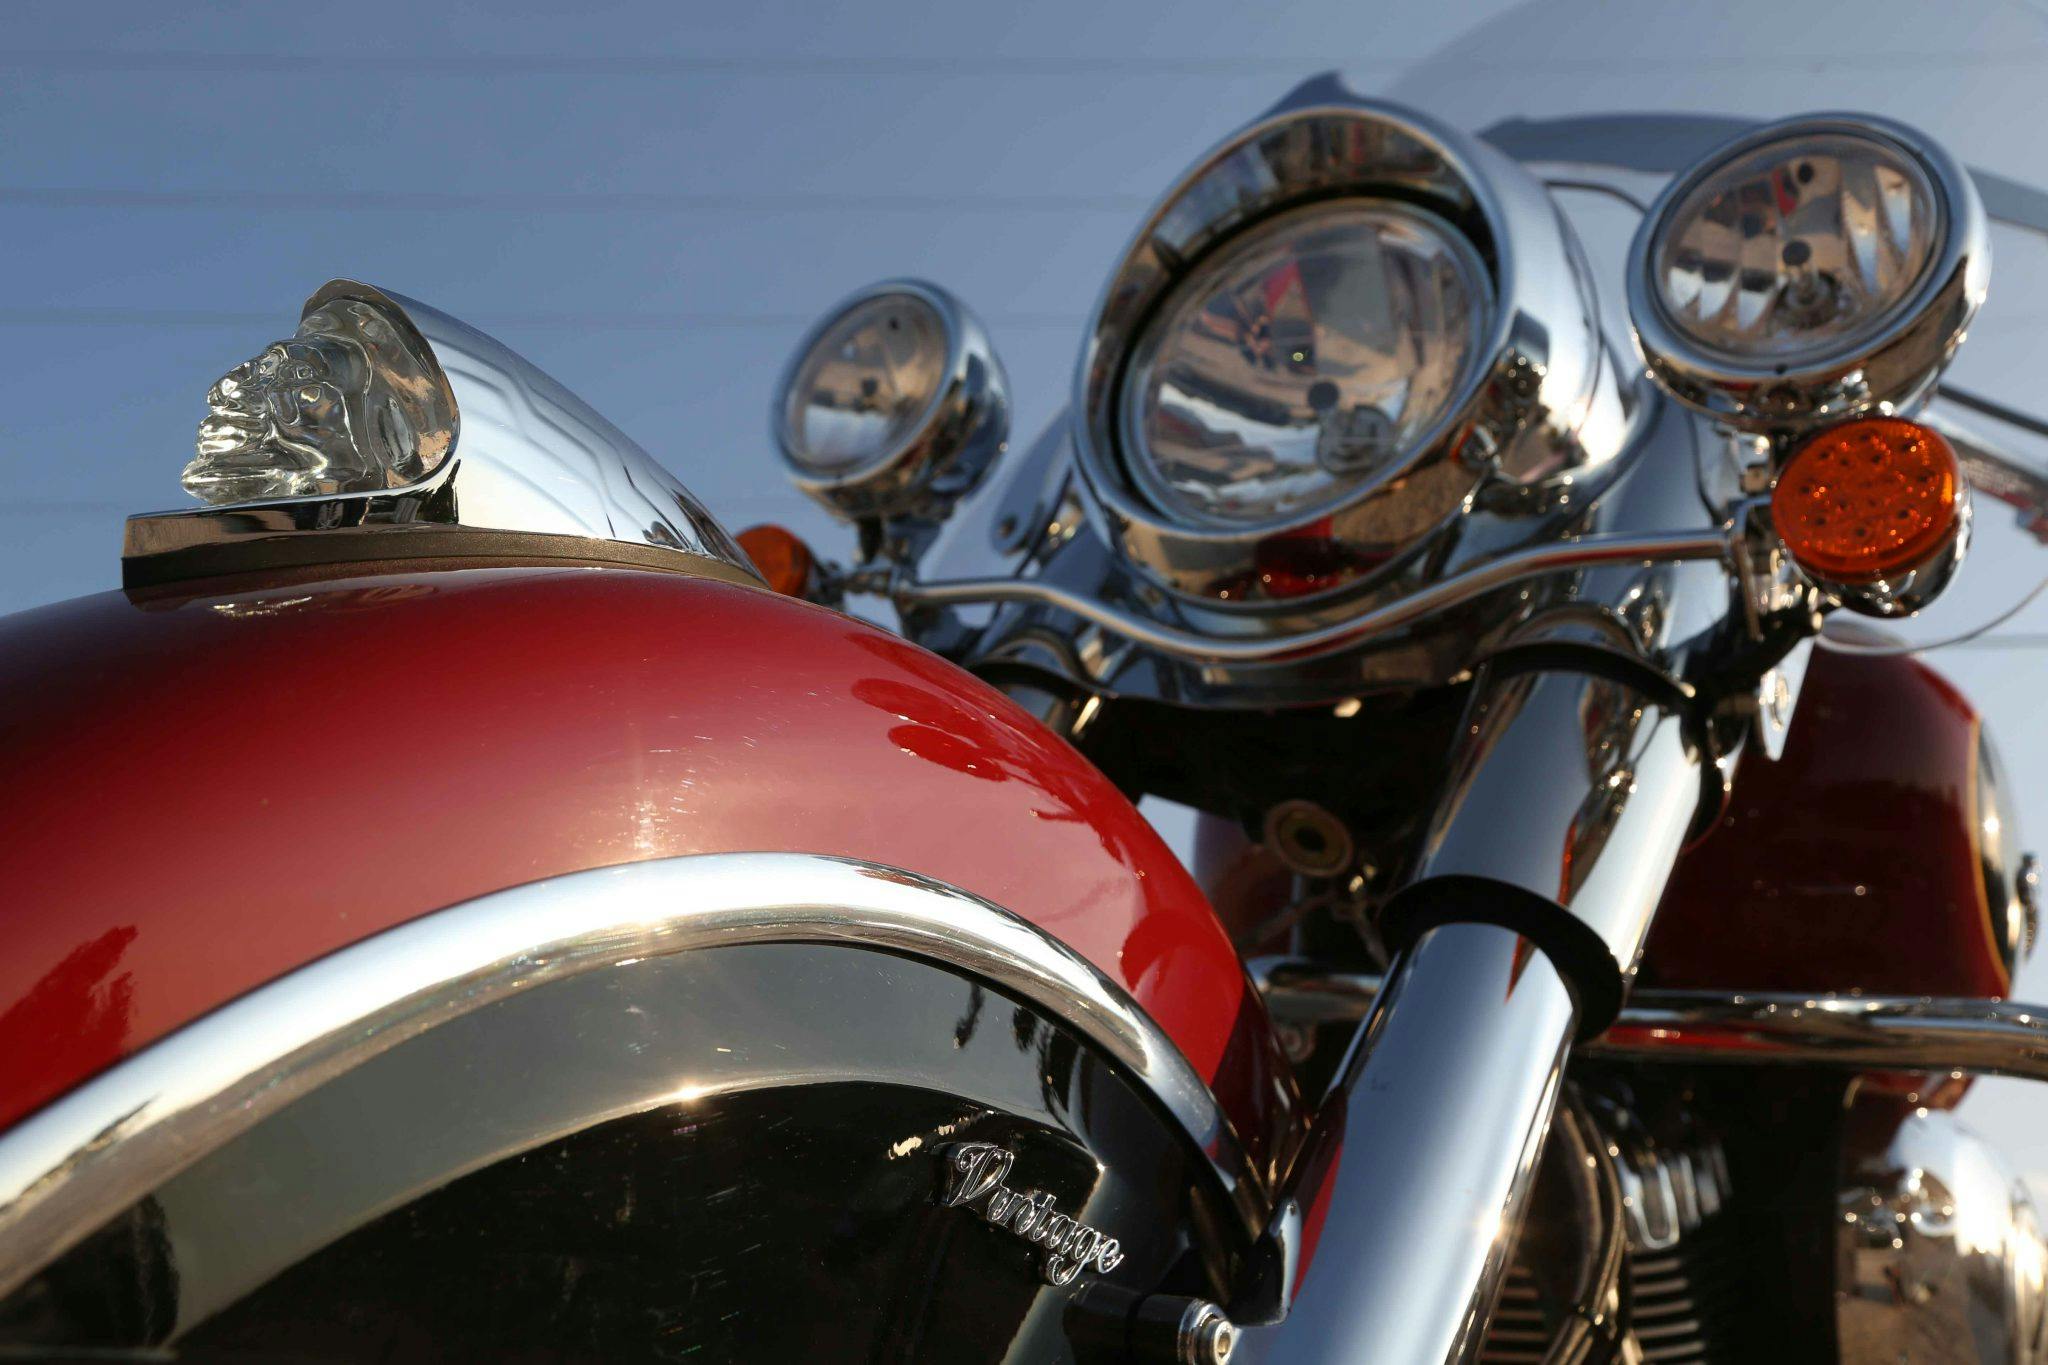 Indian Chief motorcycle cruiser front detail